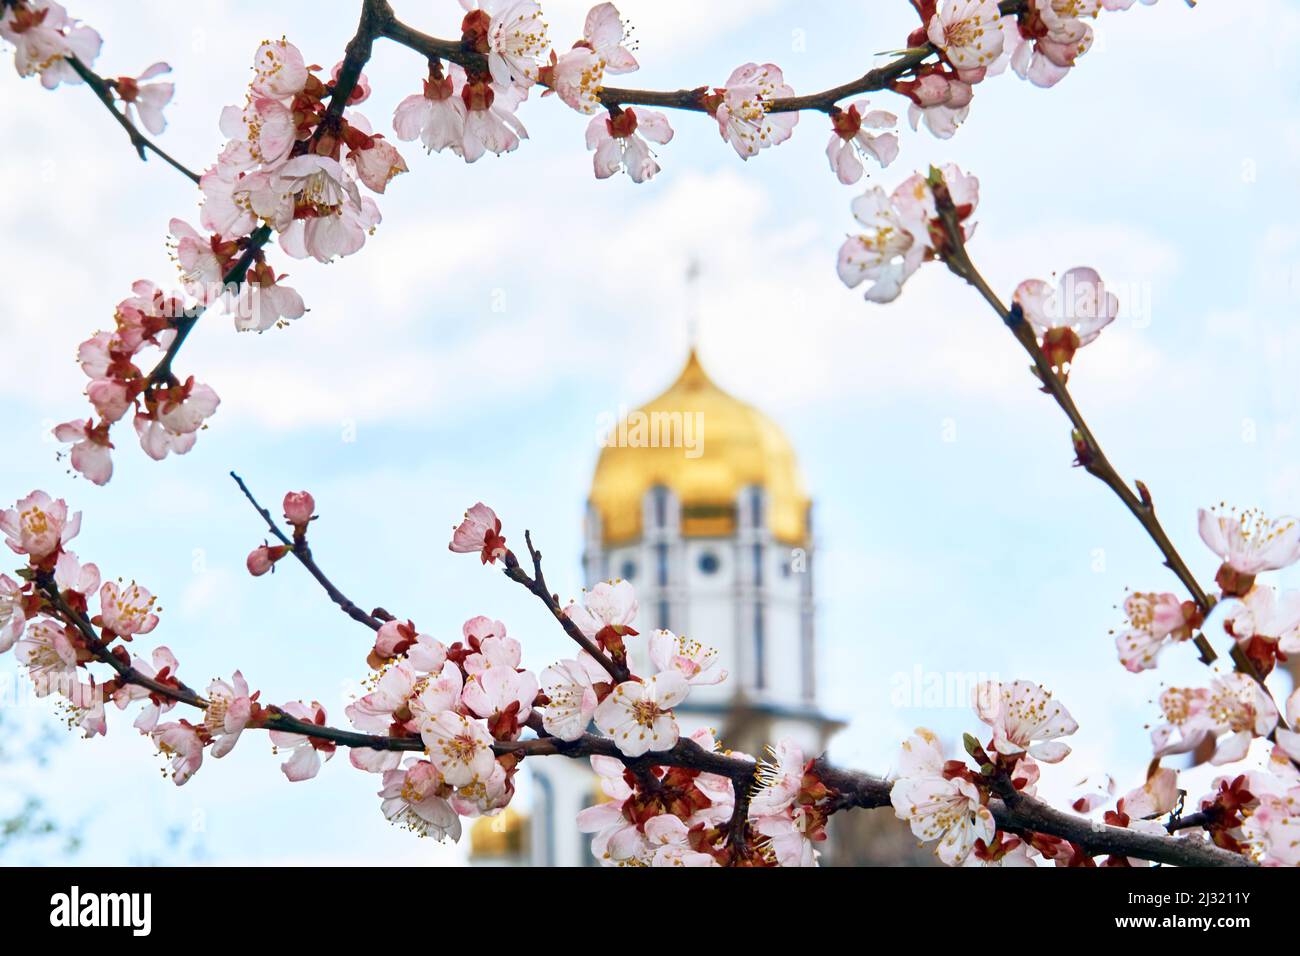 Frame of pink and white flowers and the golden dome of the church, easter sky Stock Photo